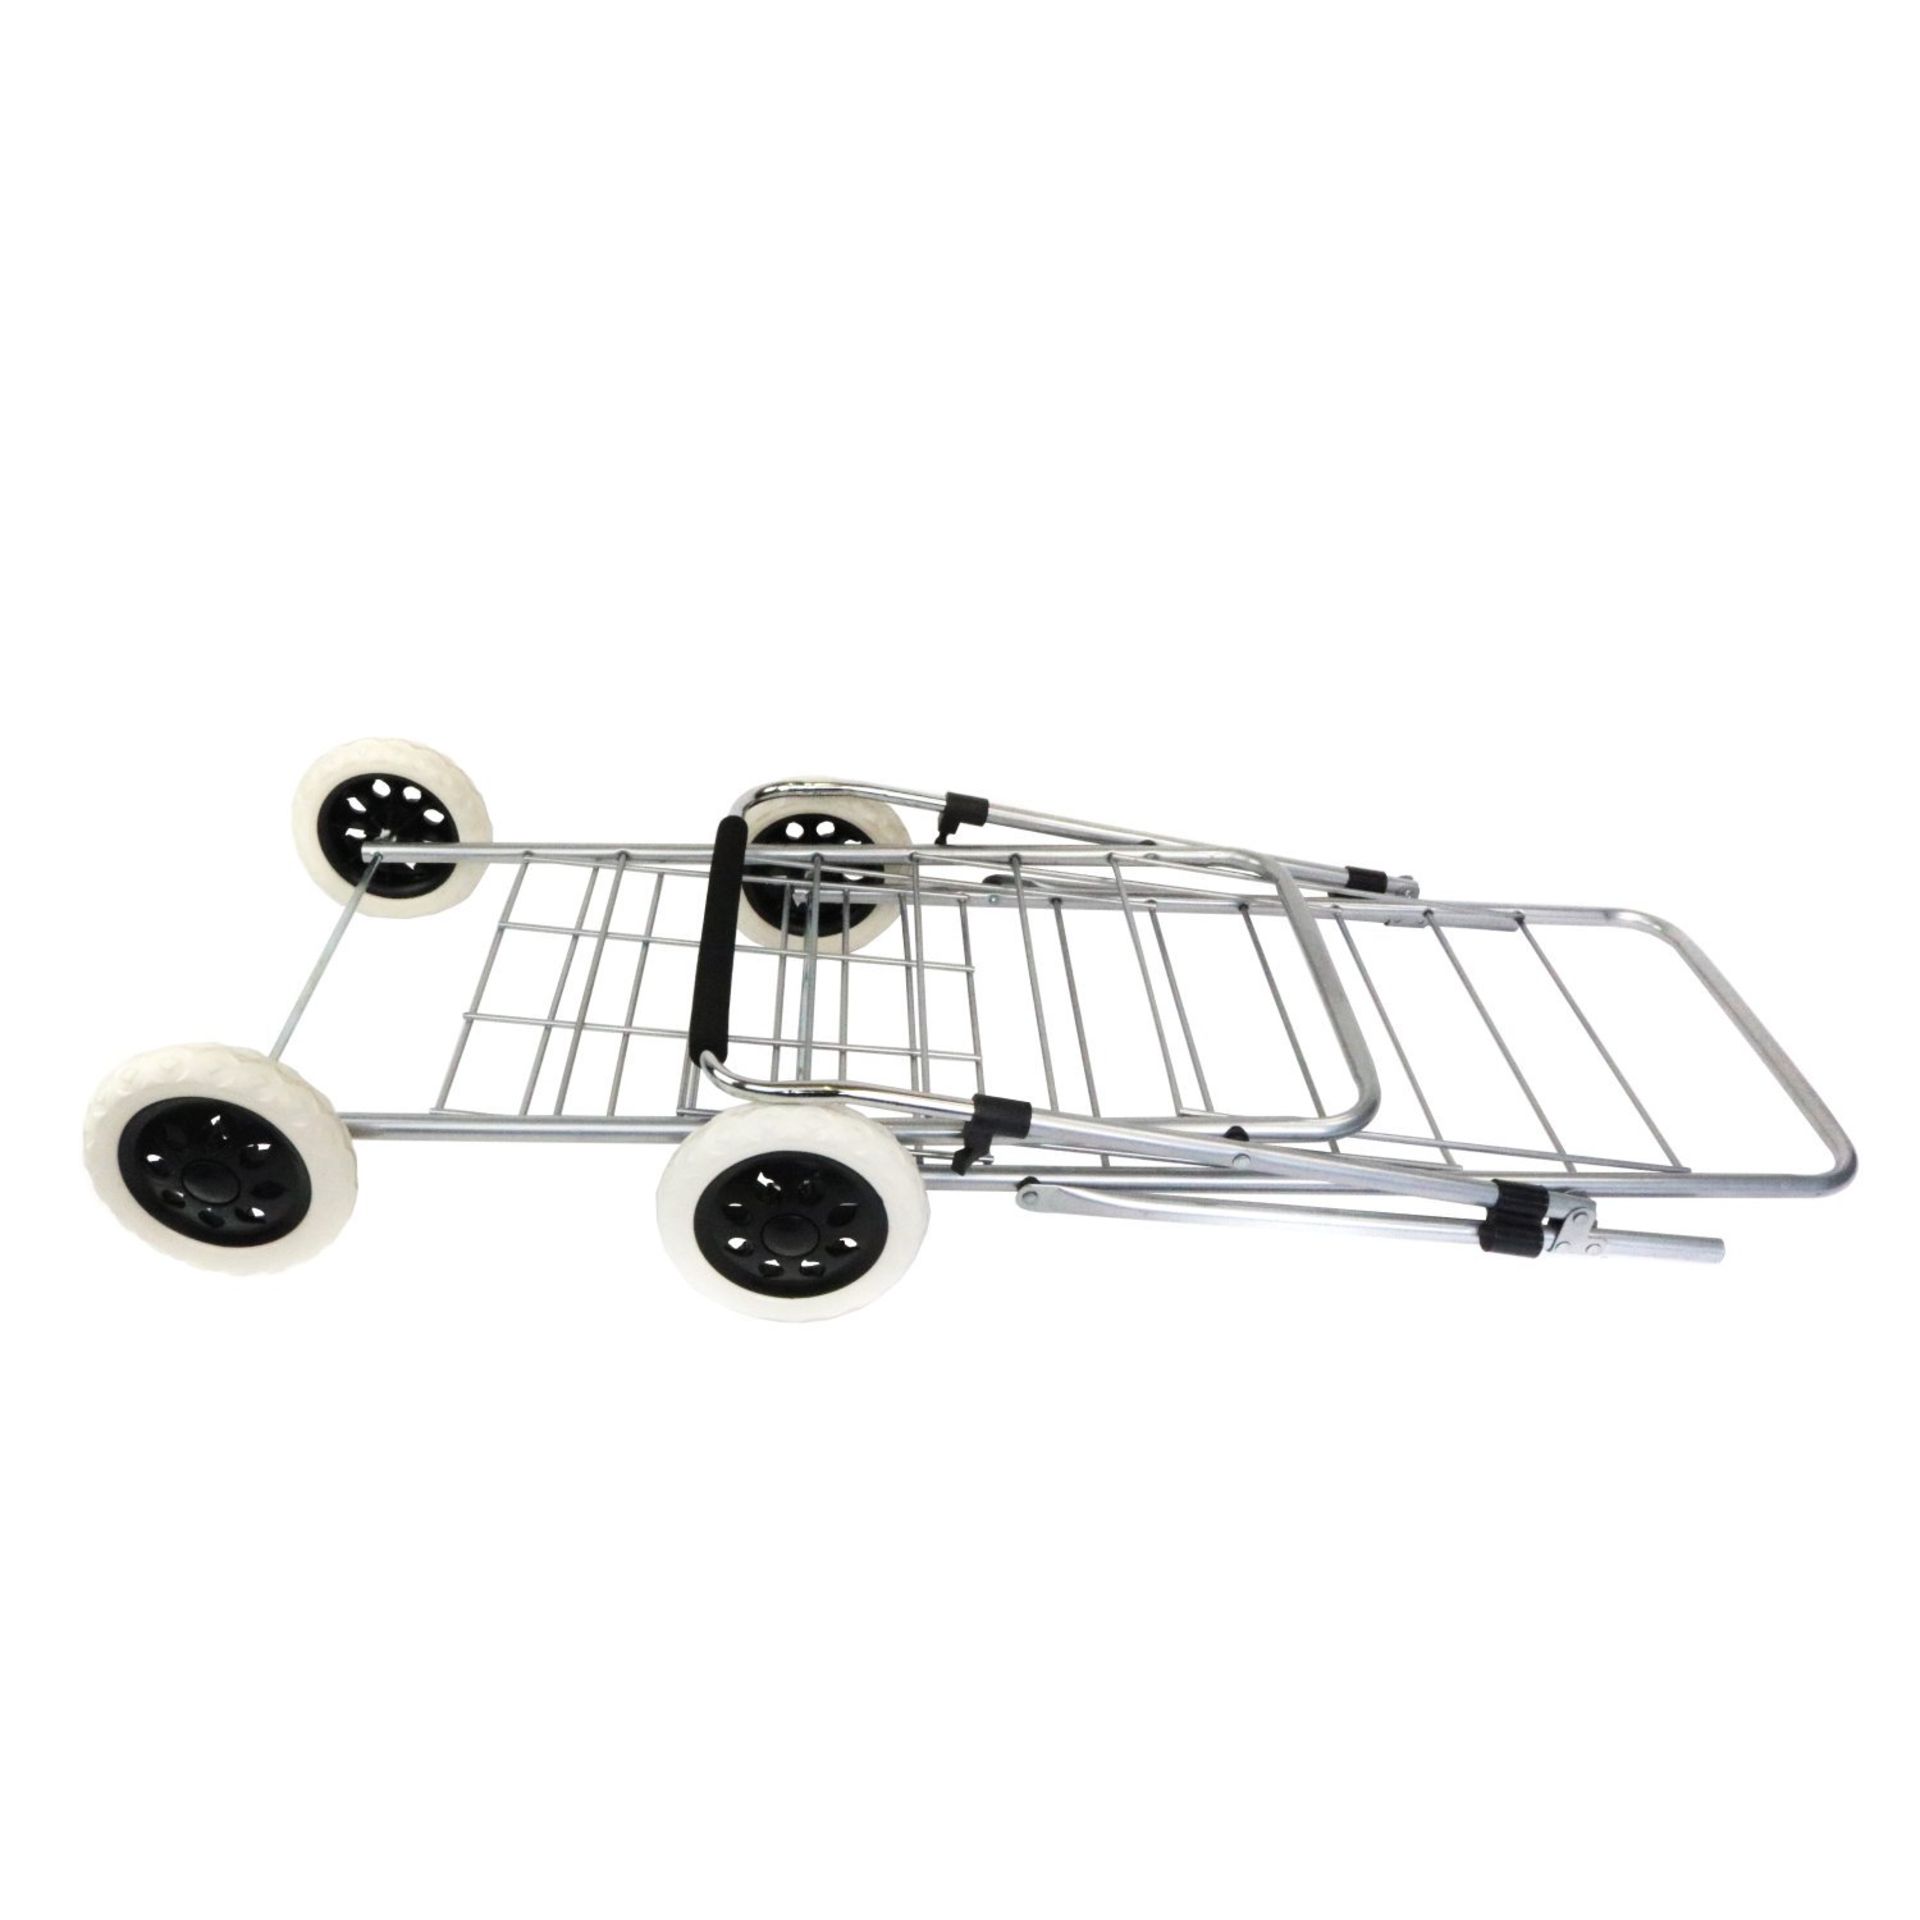 (F2) 4 Wheel Folding Shopping Trolley Bag Cart Market Laundry Lightweight and Easily Manoeuver... - Image 2 of 3